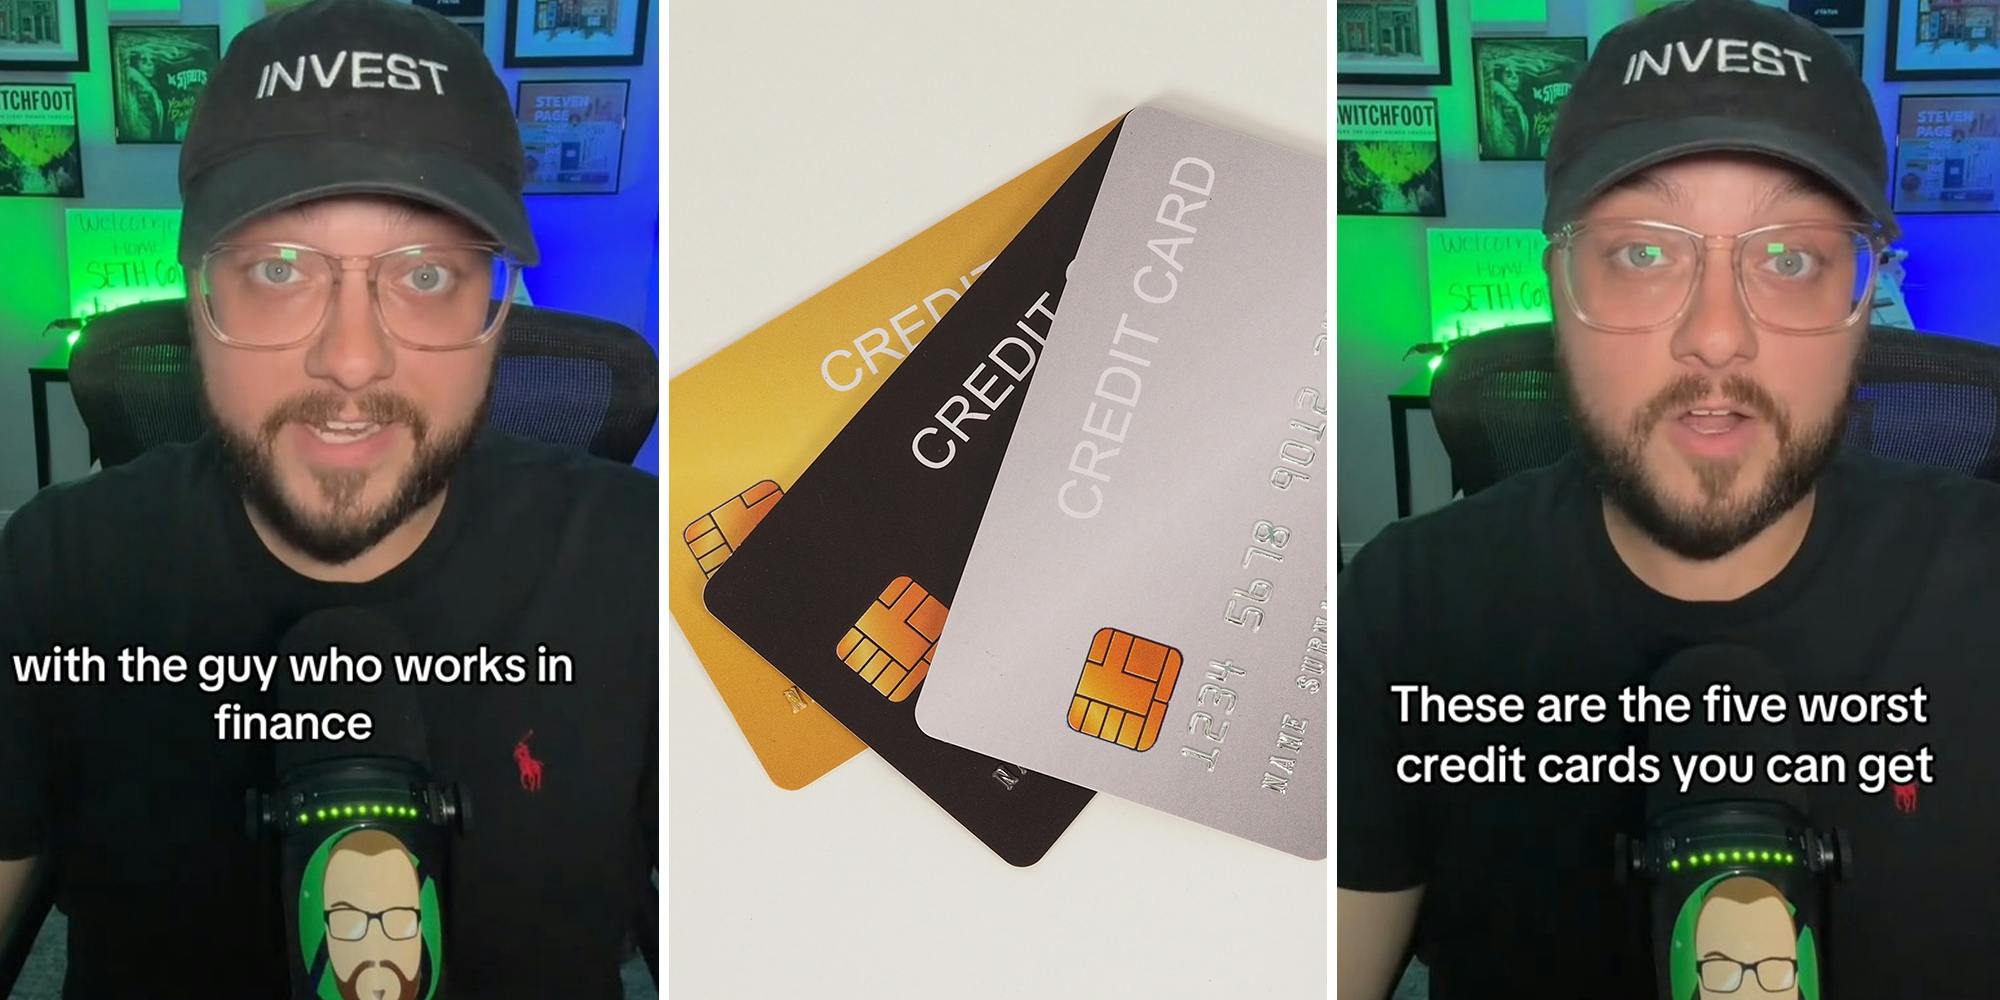 Finance expert shares the 5 worst credit cards you can get